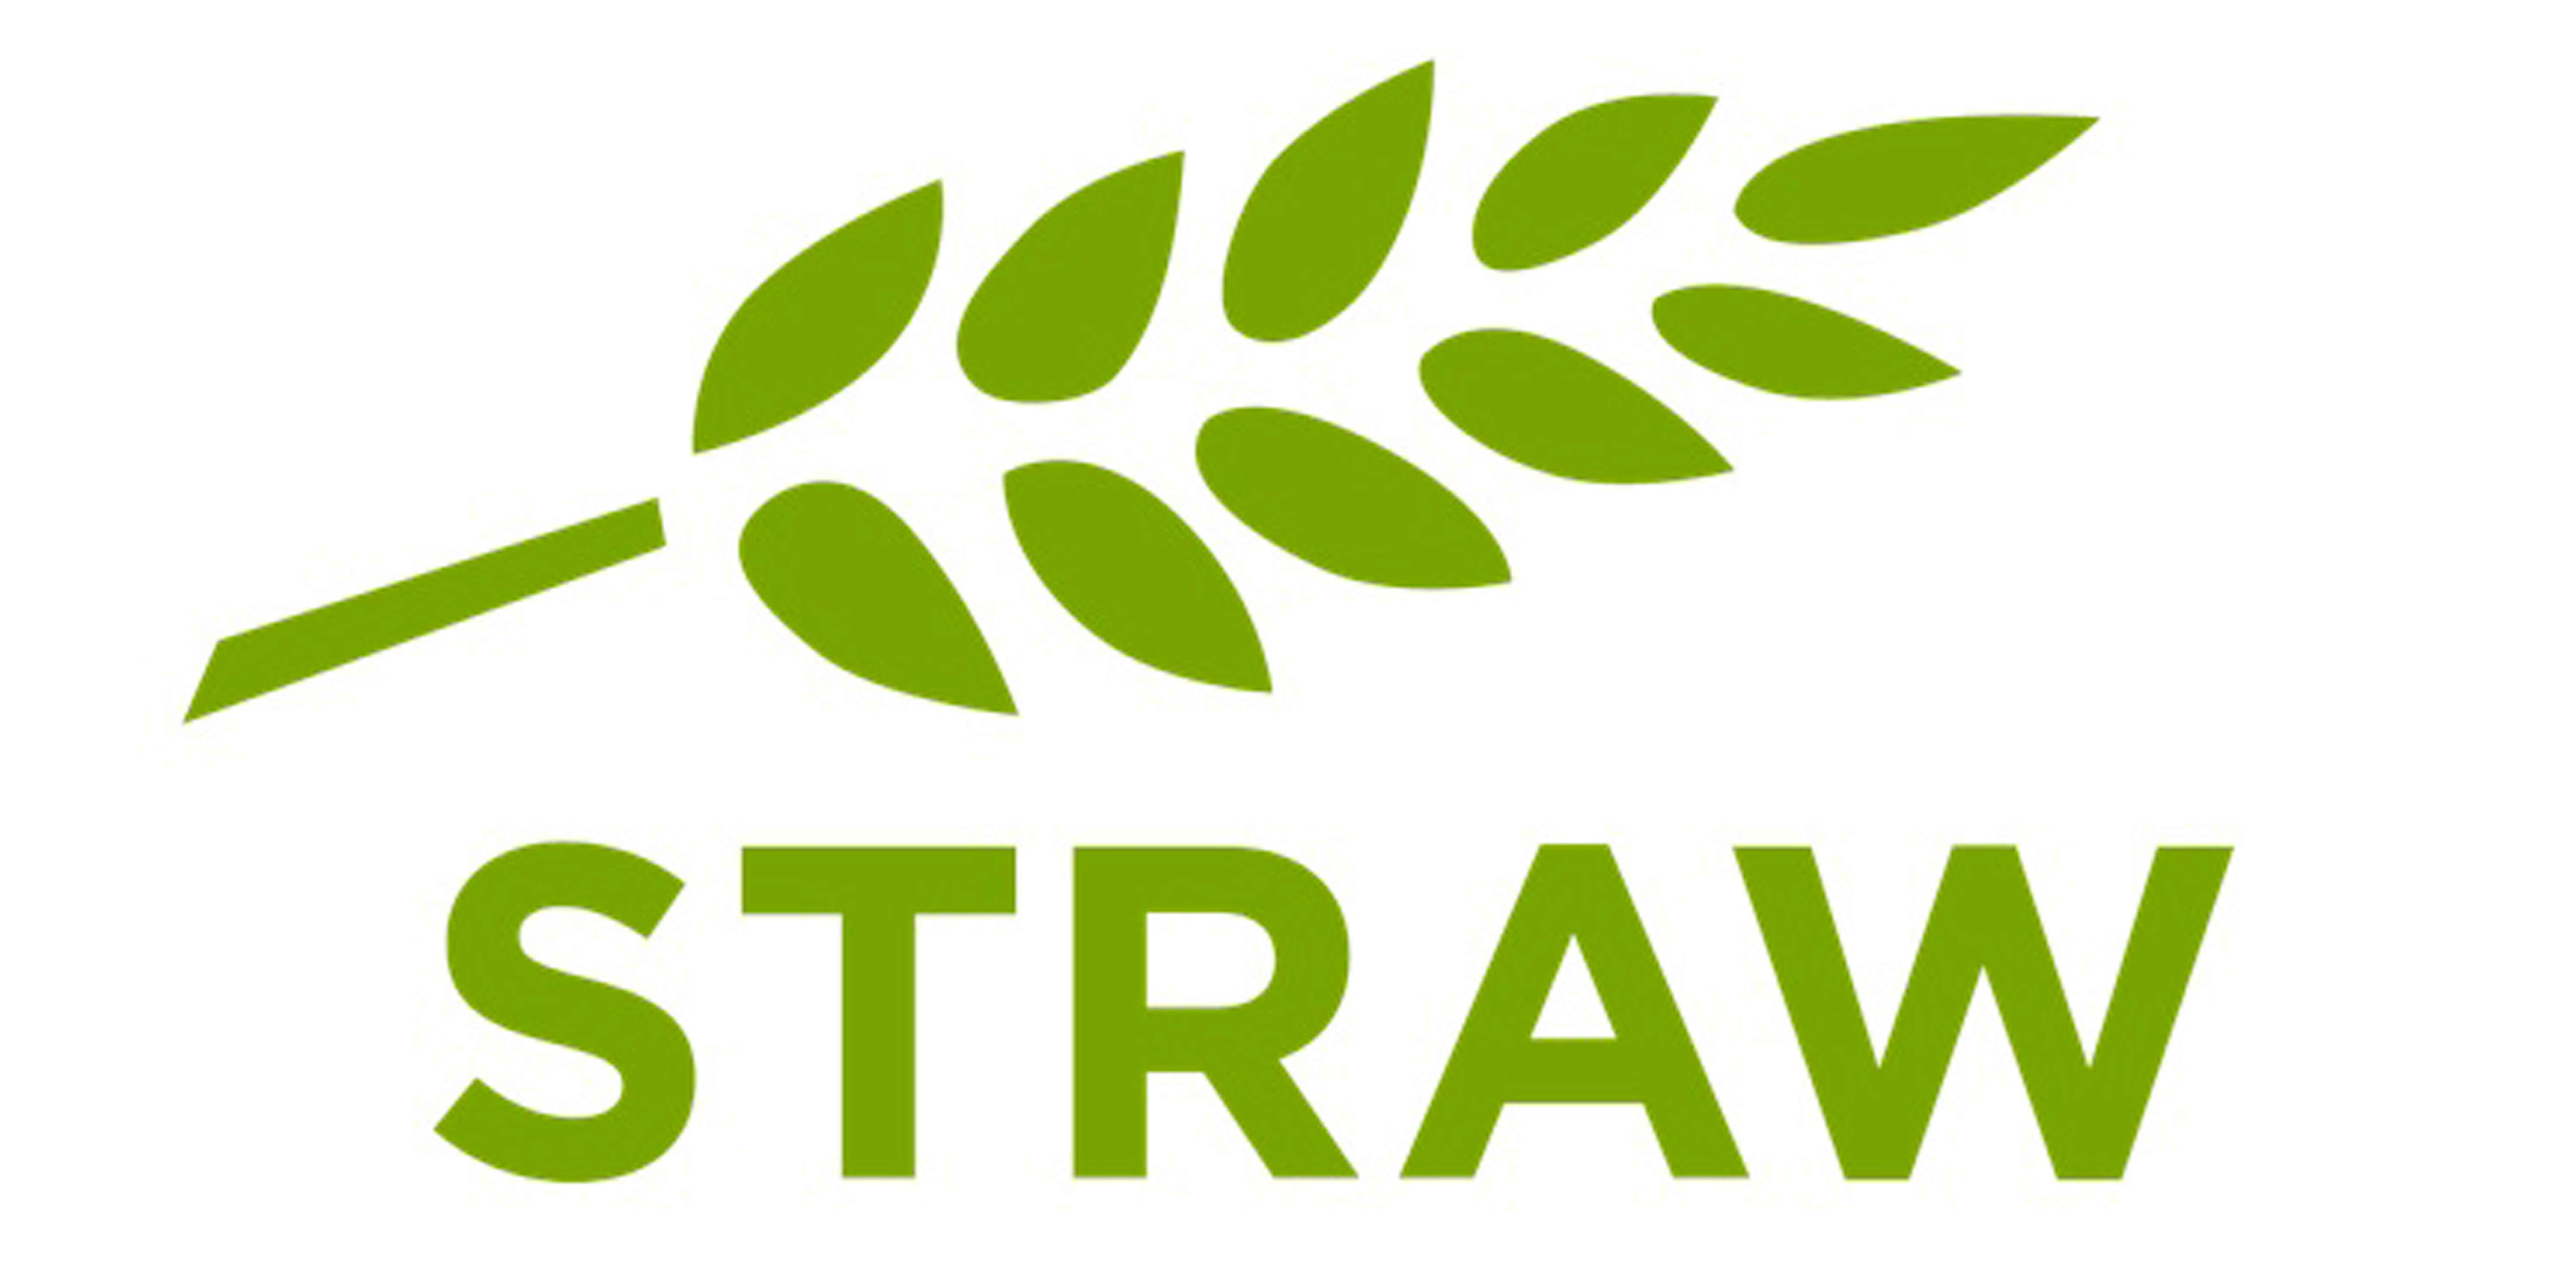 emballage-ecologique-industrie-logo-straw